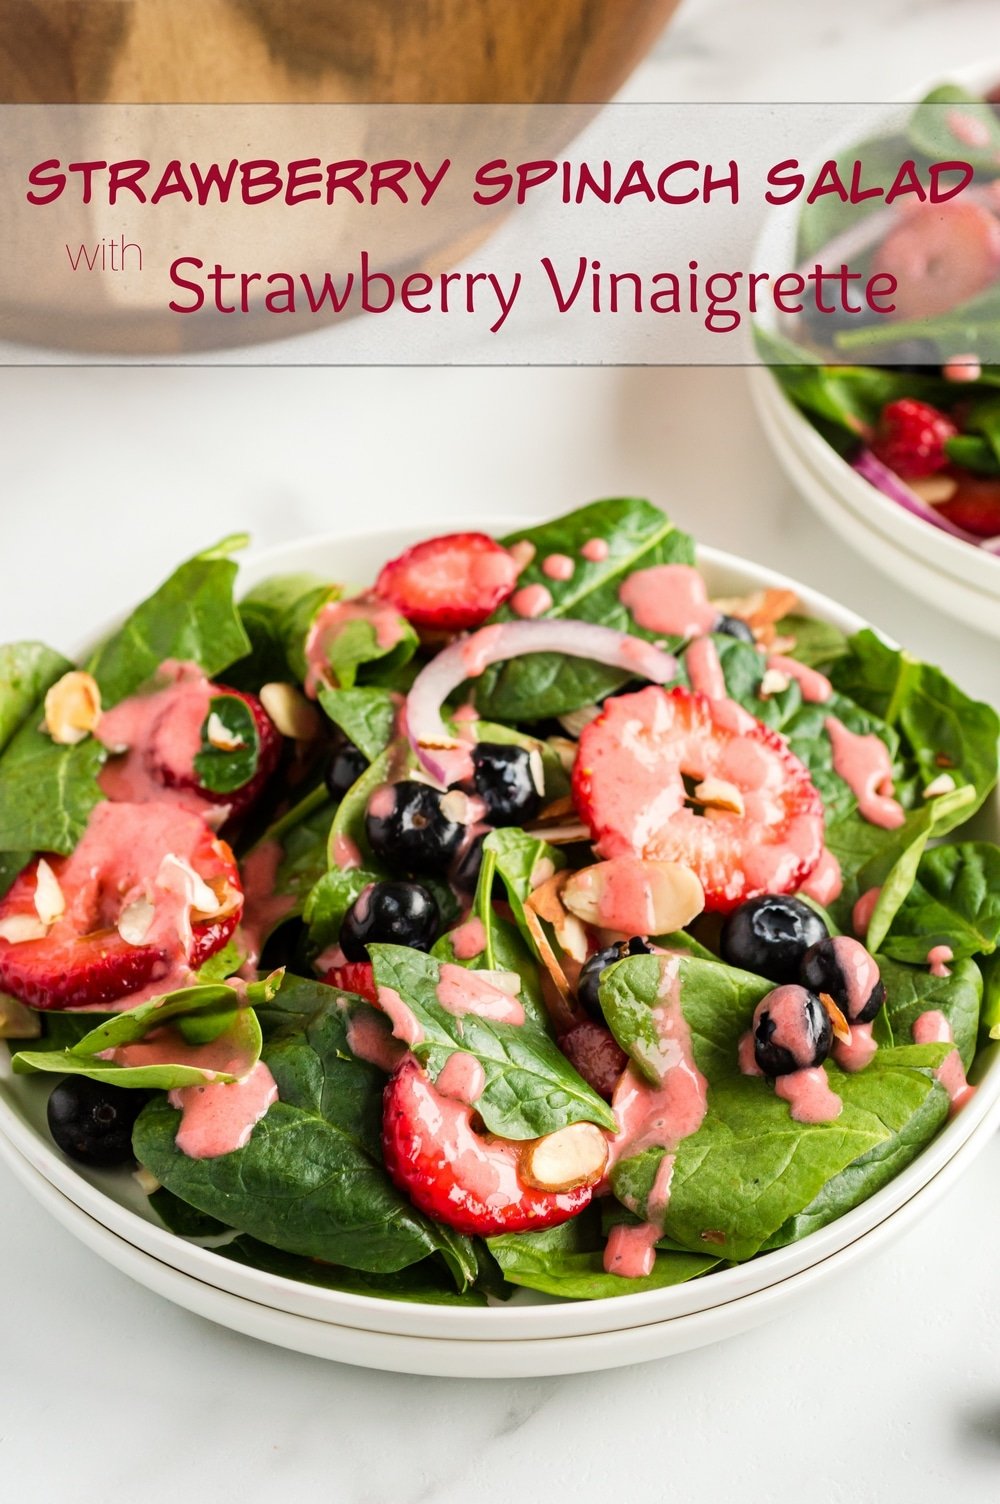 A berry driven spinach salad both adults and kids will love. A simple strawberry vinaigrette that not only perks up the greens, but is pleasing on the eyes. via @cmpollak1